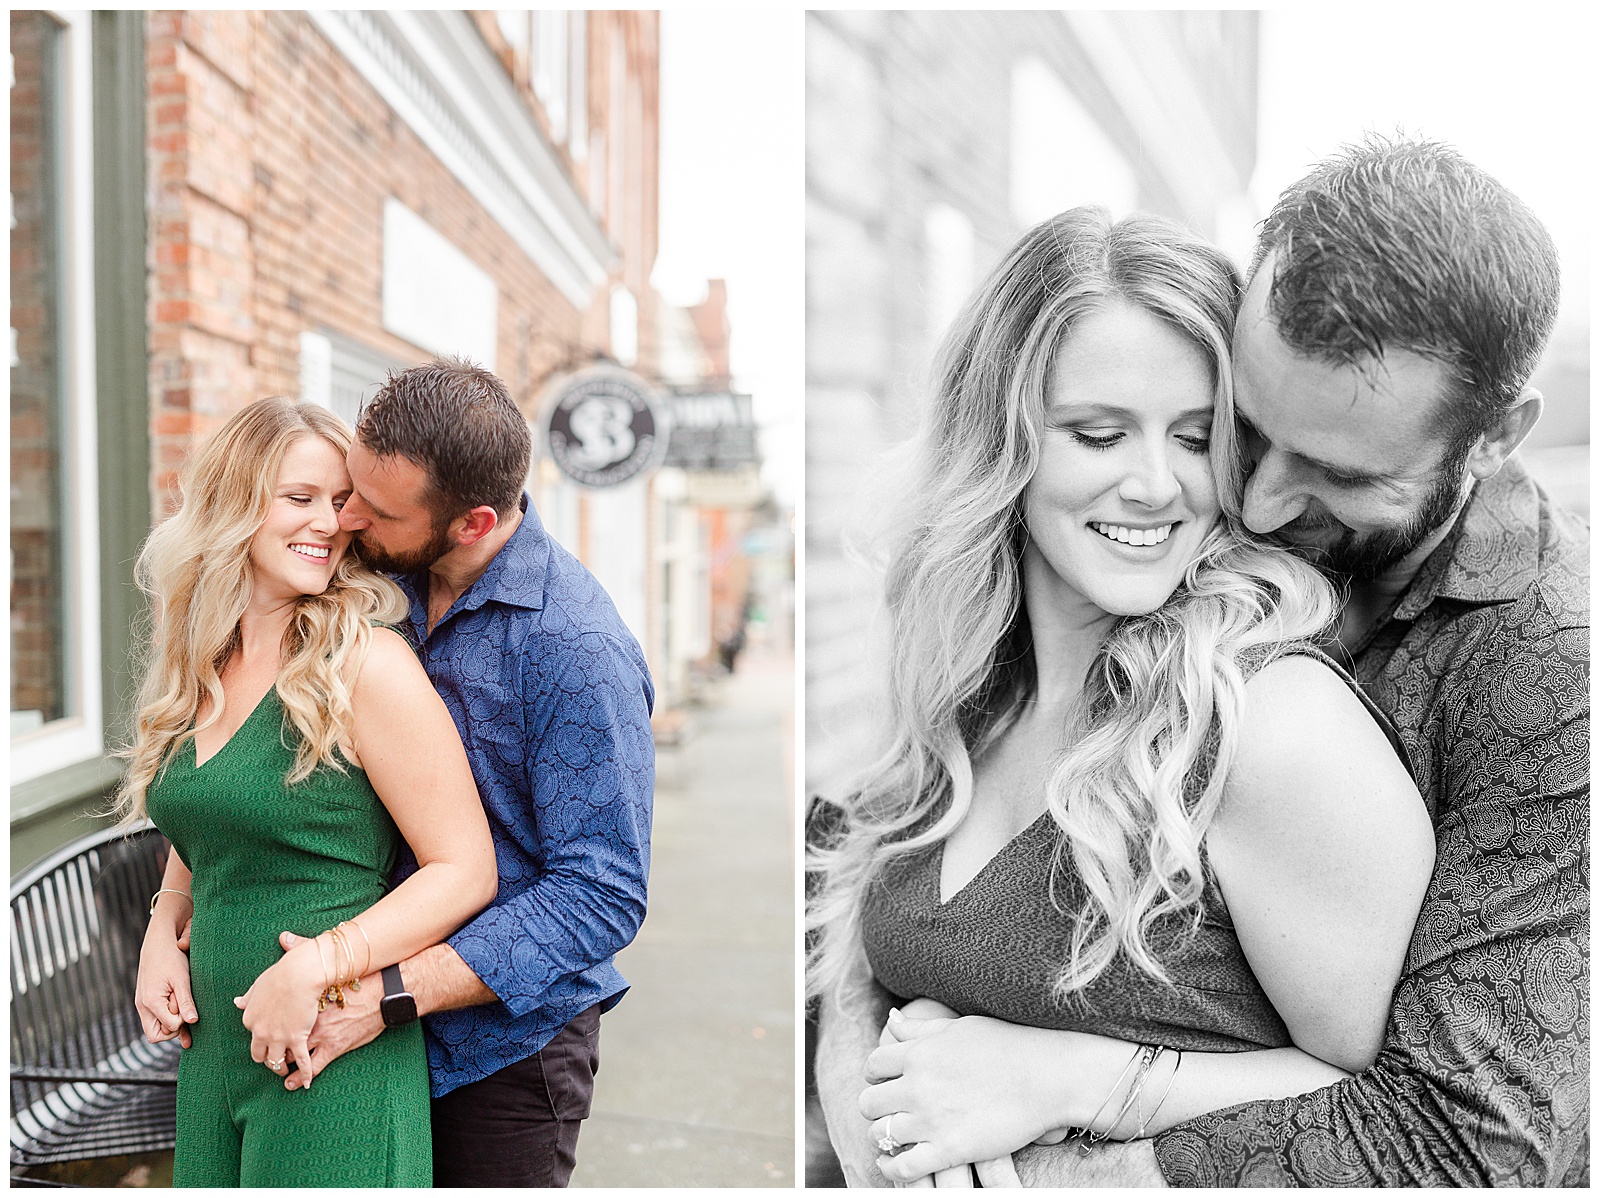 Adorable couple in downtown Waxhaw, NC Engagement Session with Green Dress Outfit Ideas